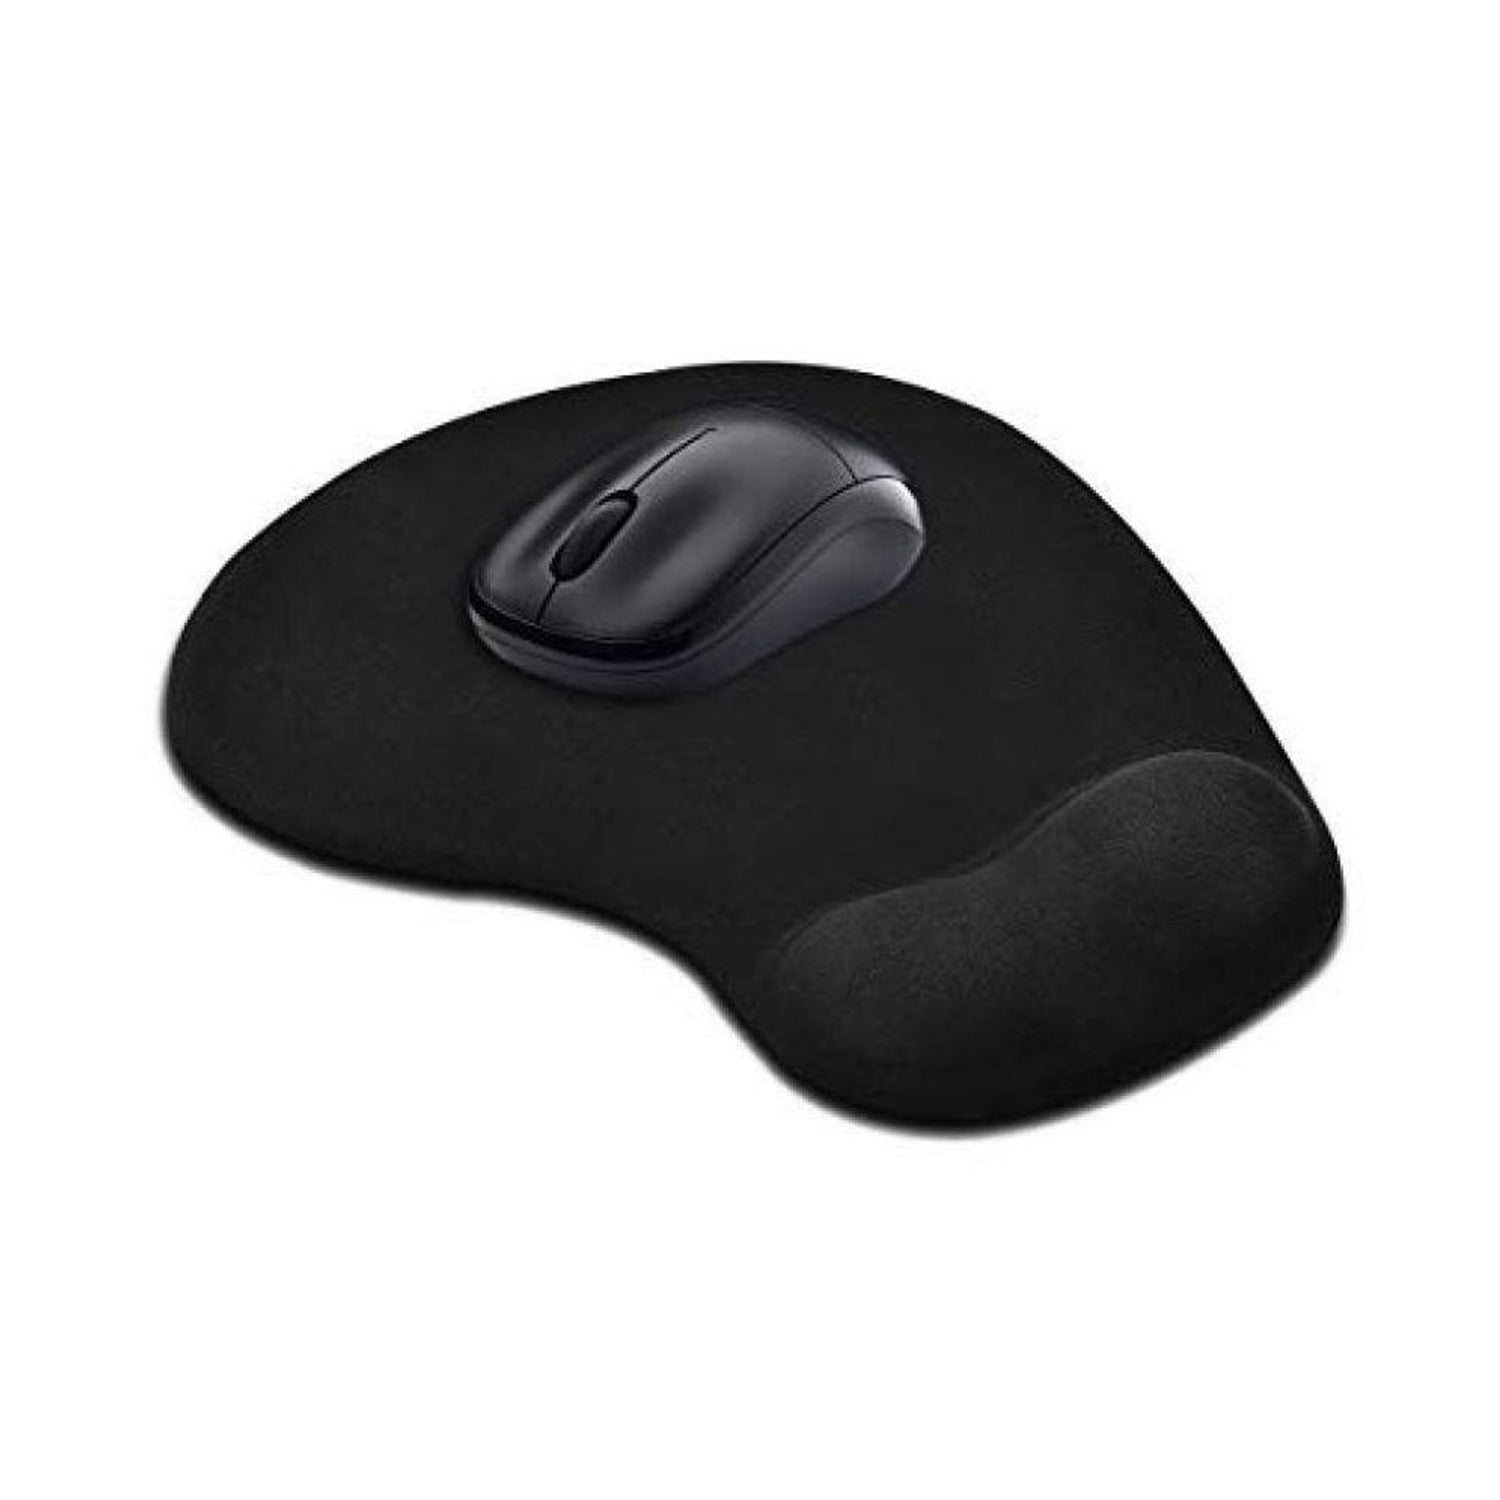 6161 Wrist S Mouse Pad Used For Mouse While Using Computer. freeshipping DeoDap